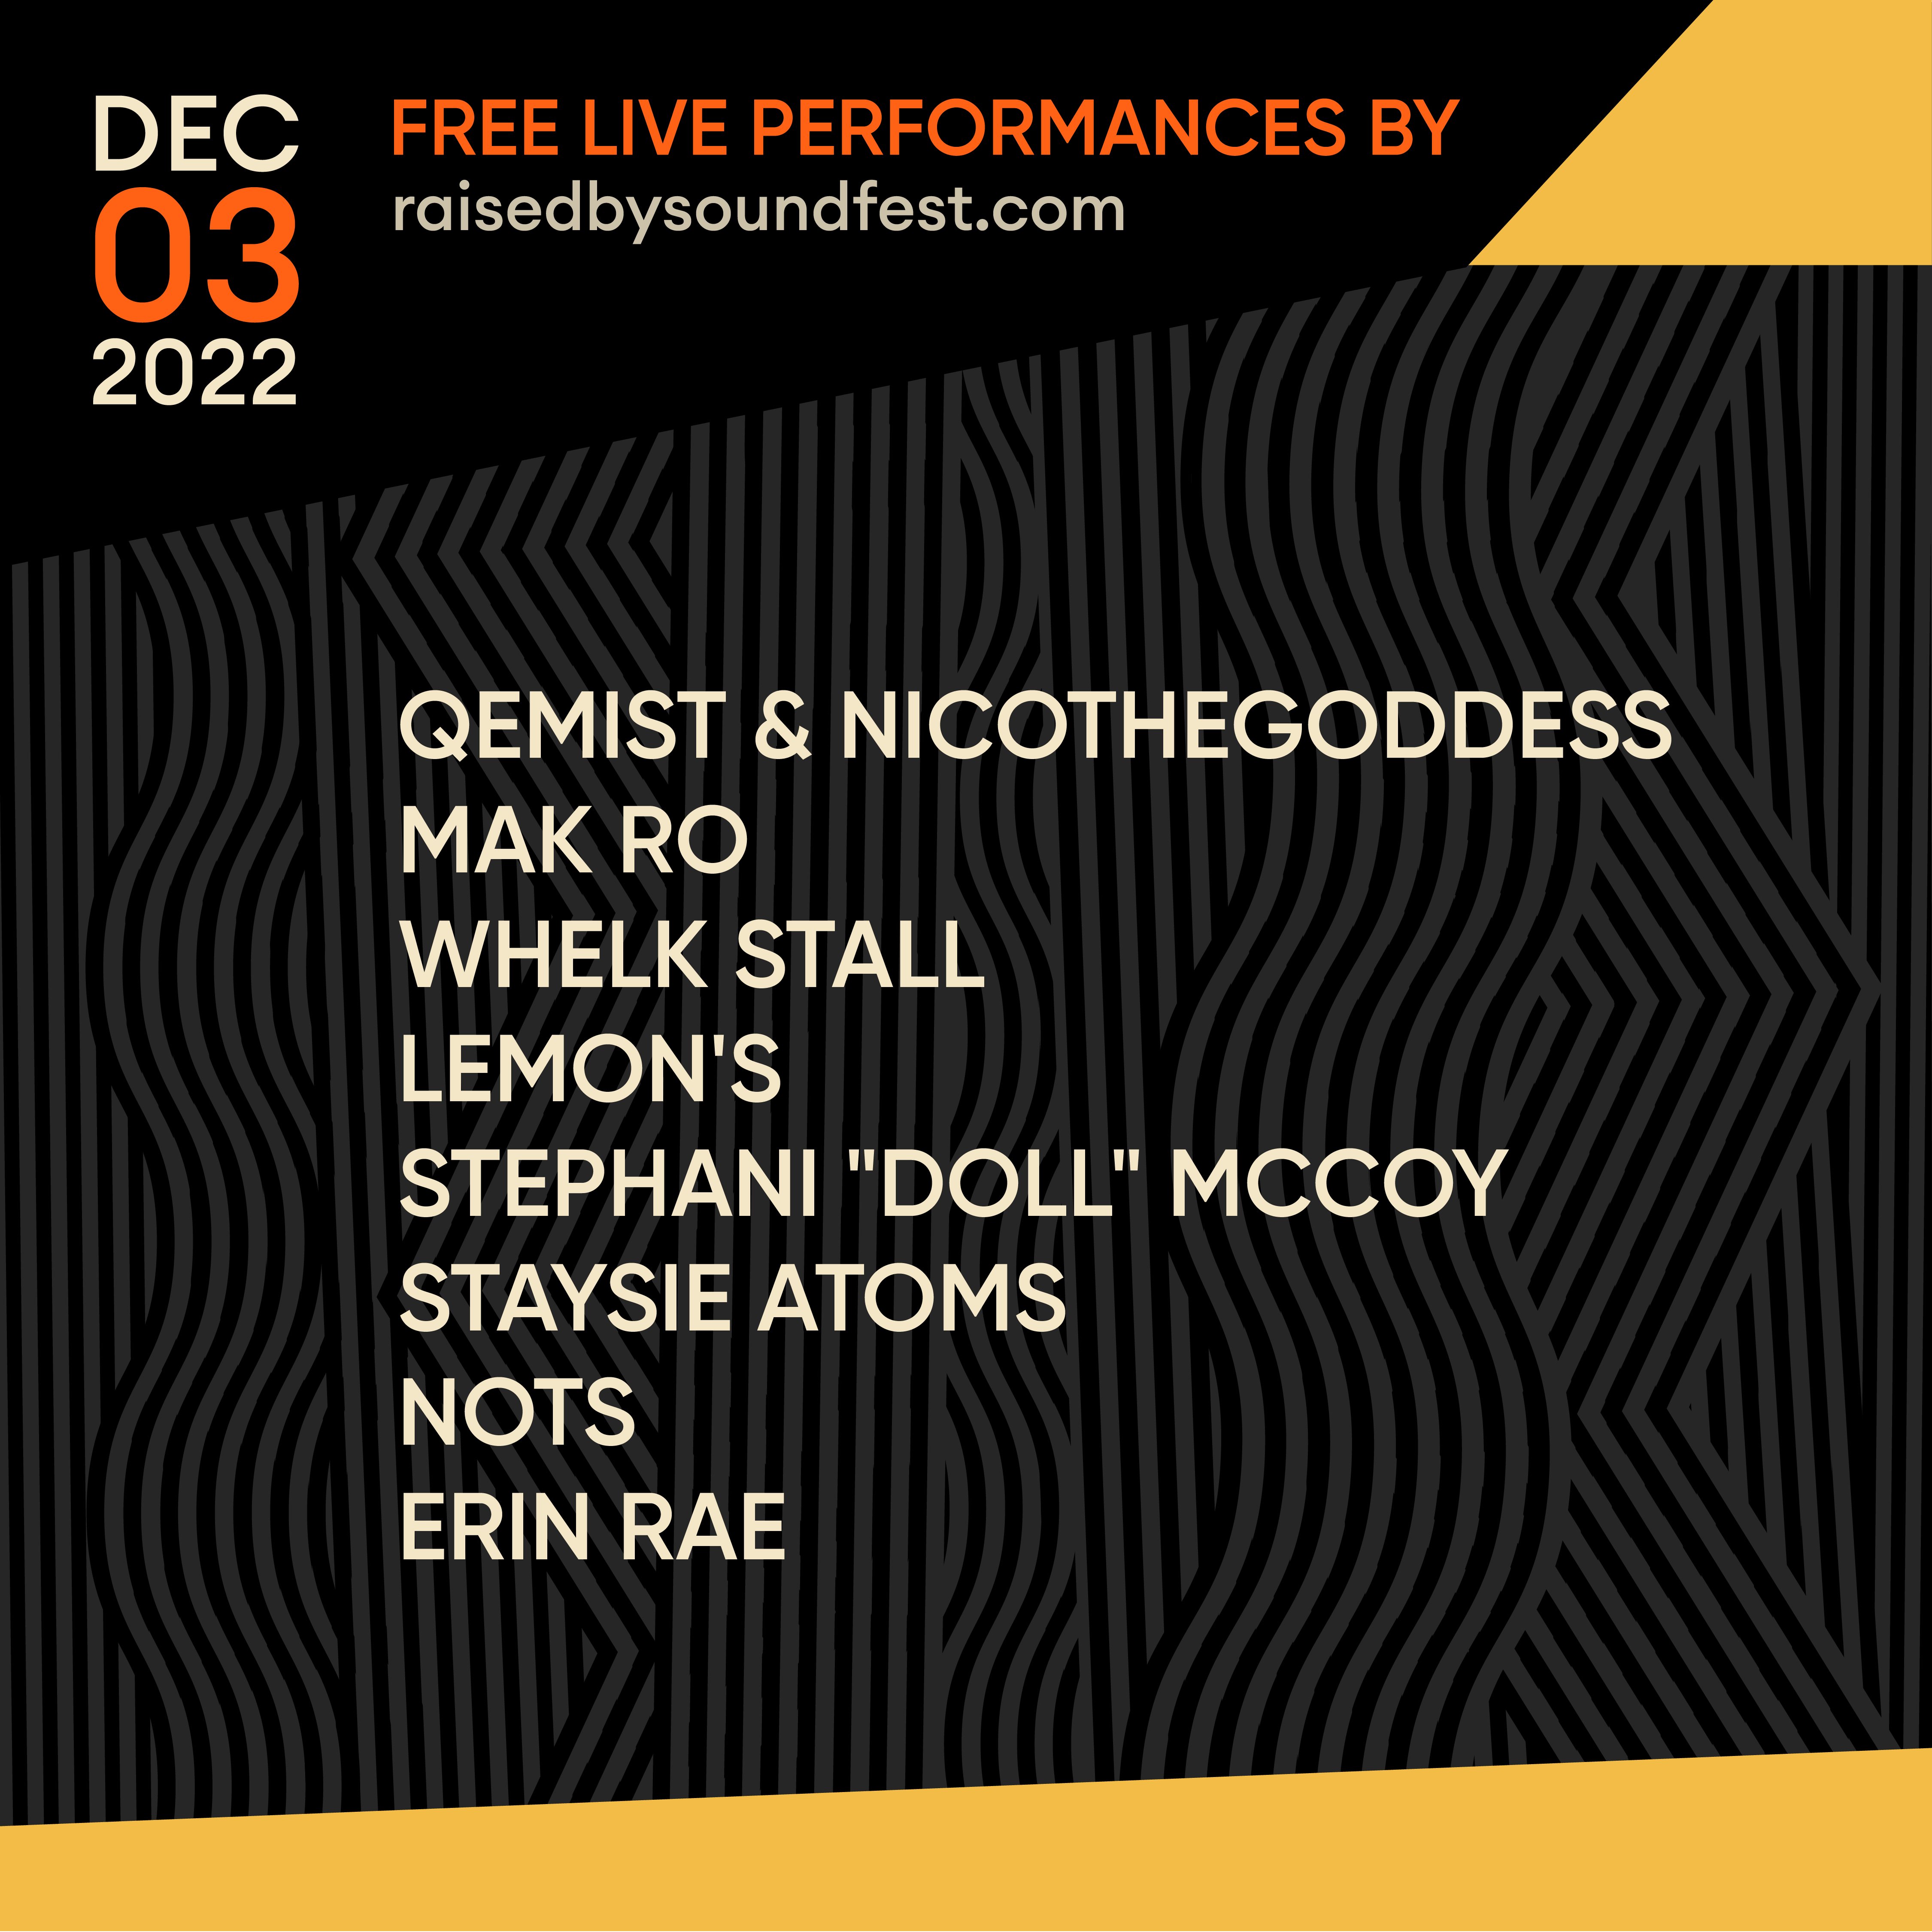 December live performances by osmosis & goddesses featured on WYXR.